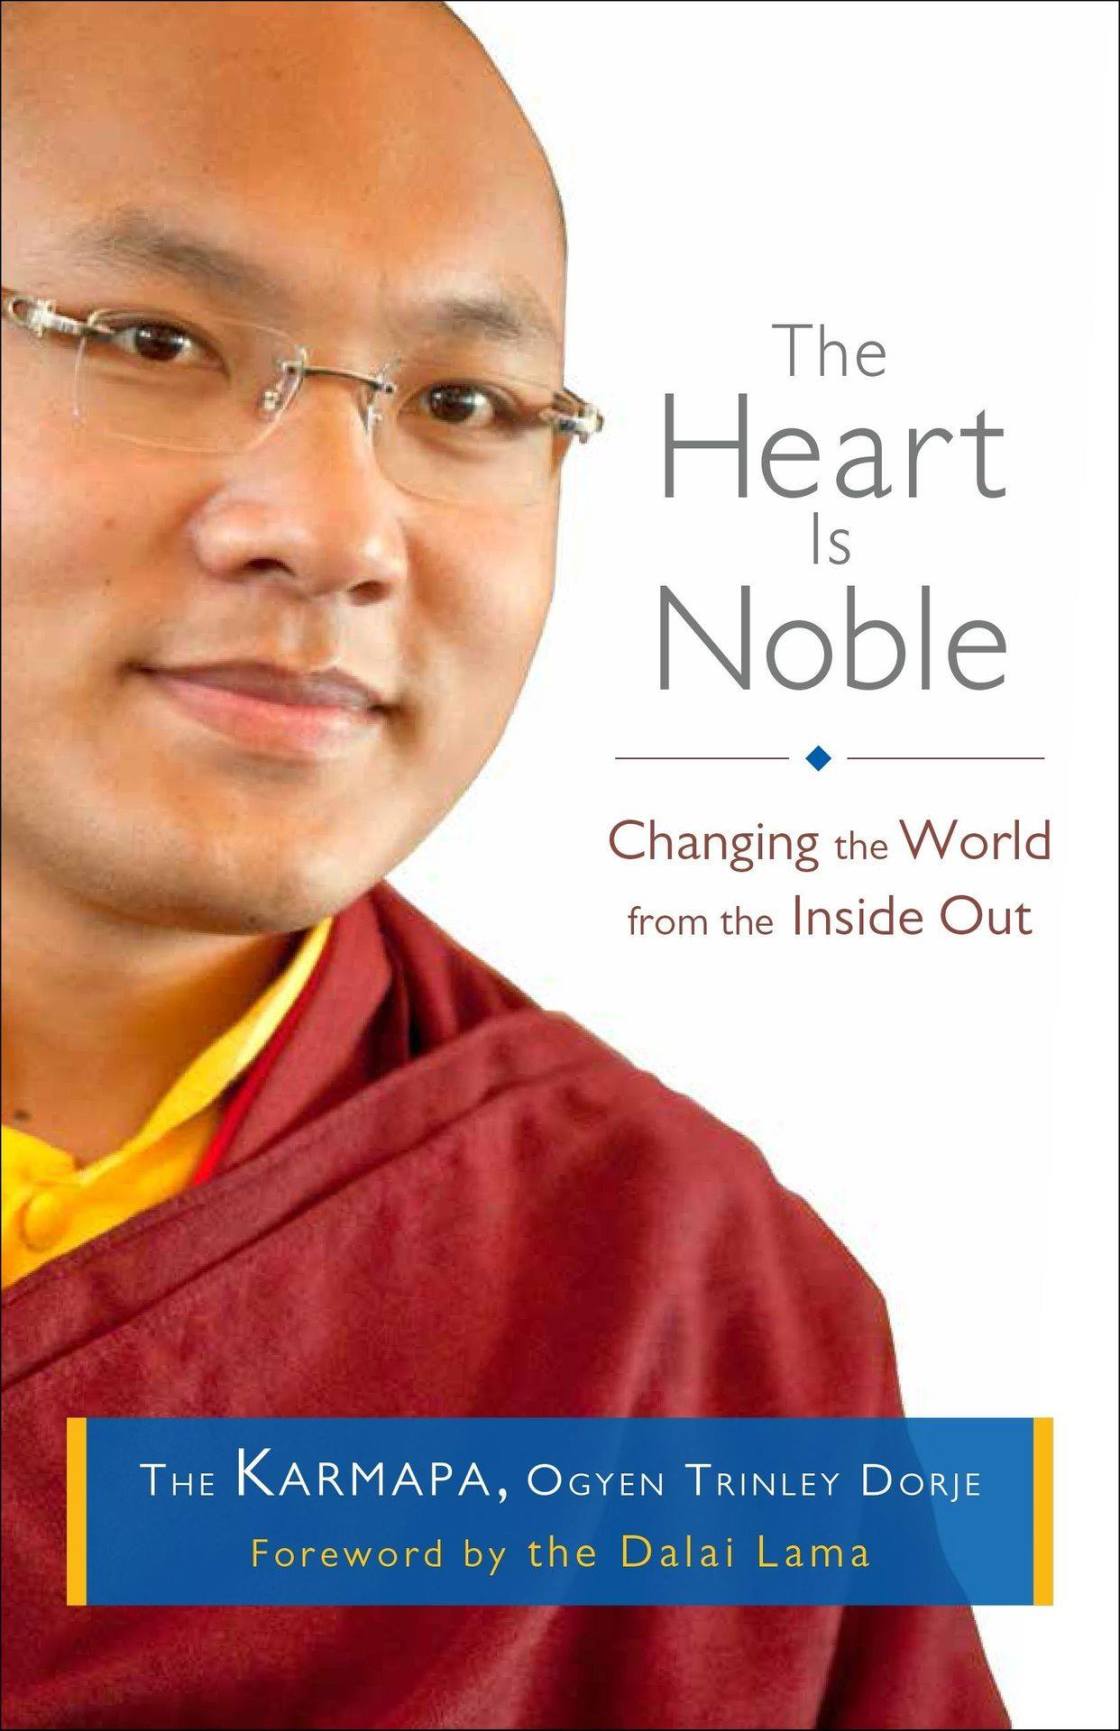 "The Heart is Noble" stock image